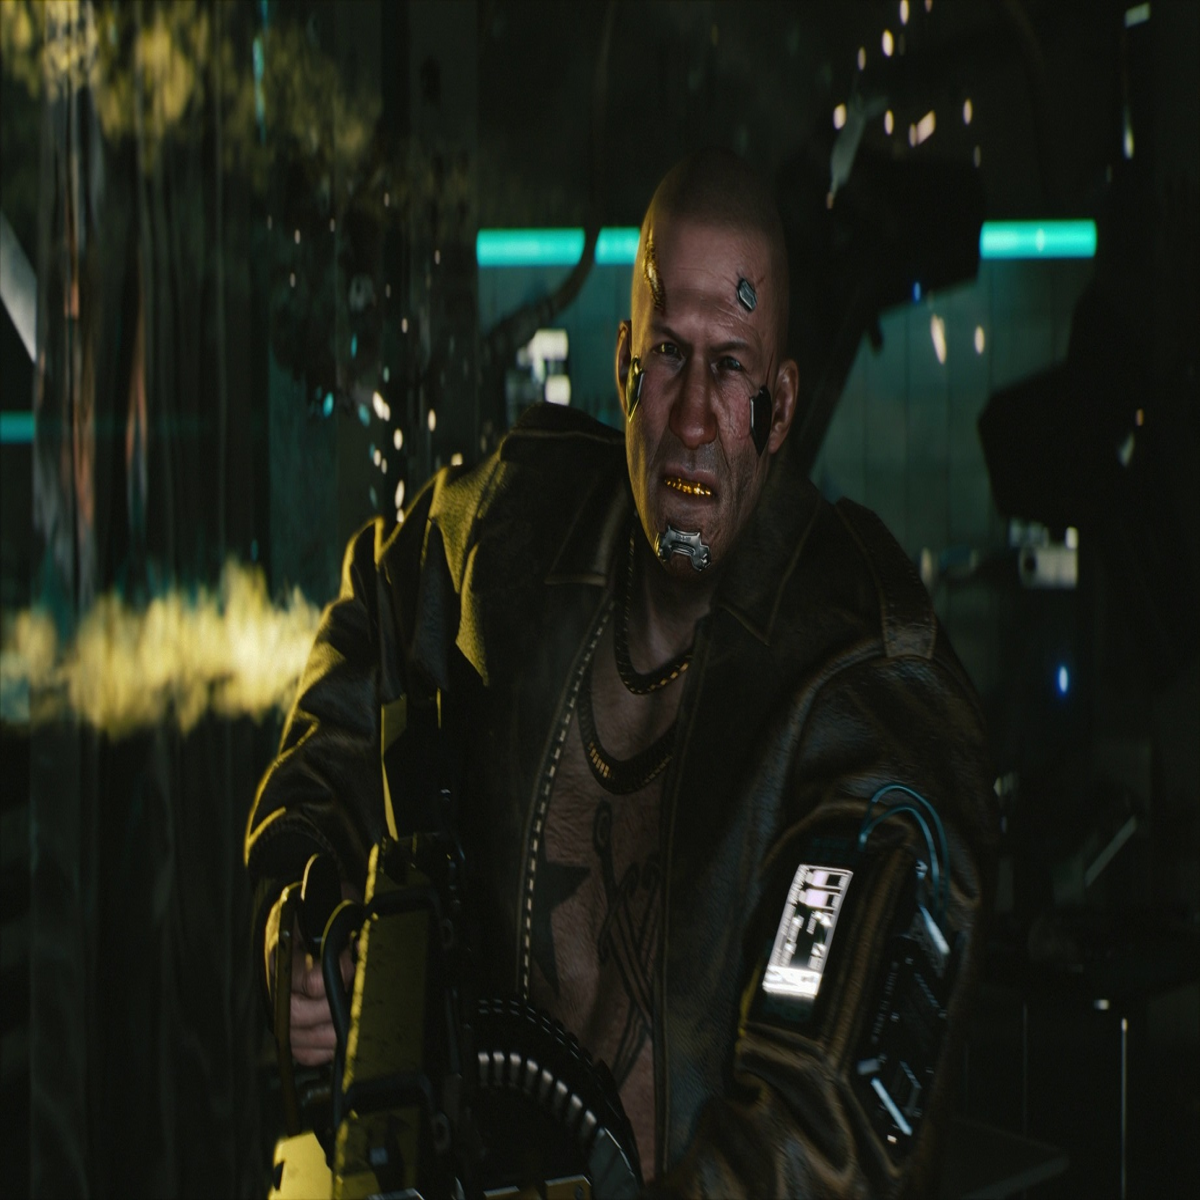 Why Cyberpunk 2077 turned out to be a buggy disaster.